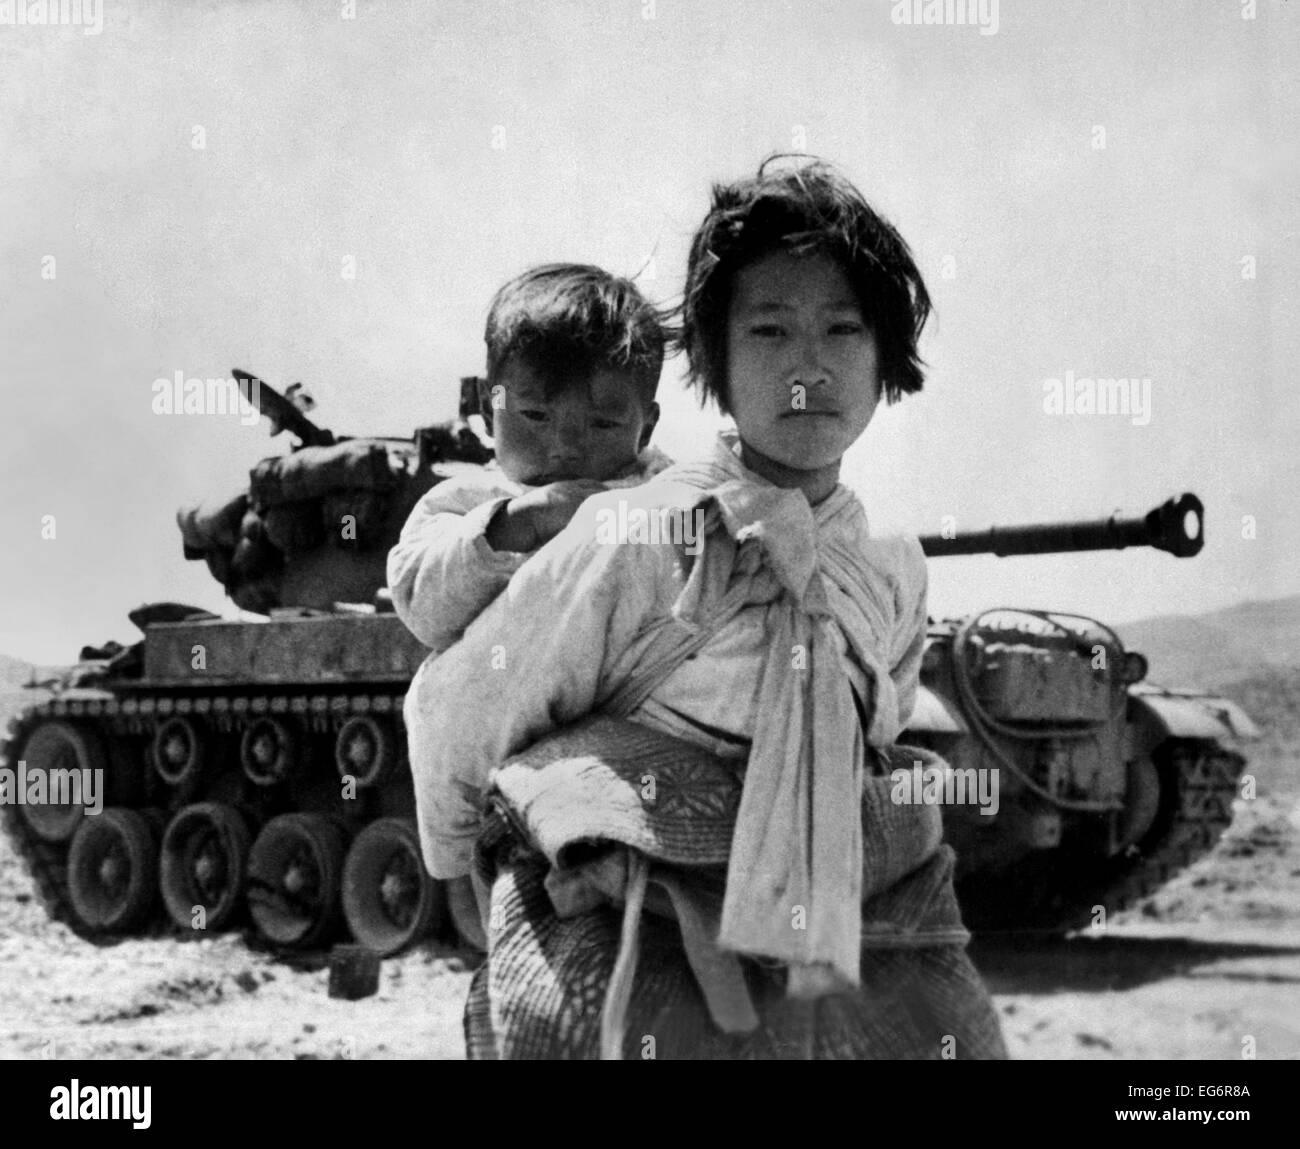 With her brother on her back, a war weary Korean girl tiredly trudges by a stalled M-26 tank, at Haengju, Korea. June 9, 1951. Stock Photo